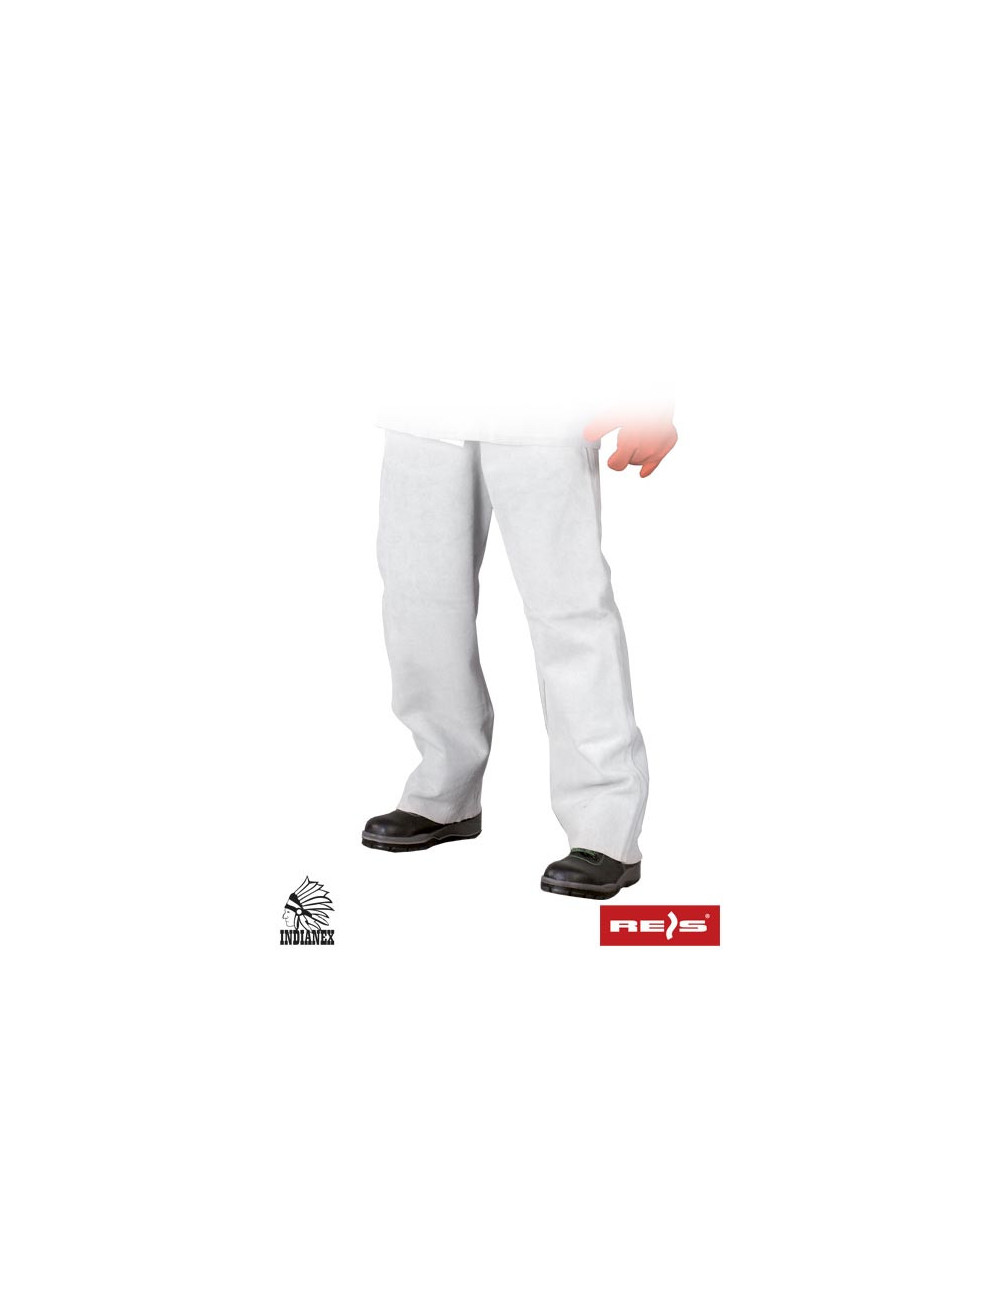 Leather protective trousers for ssl welders in white Reis